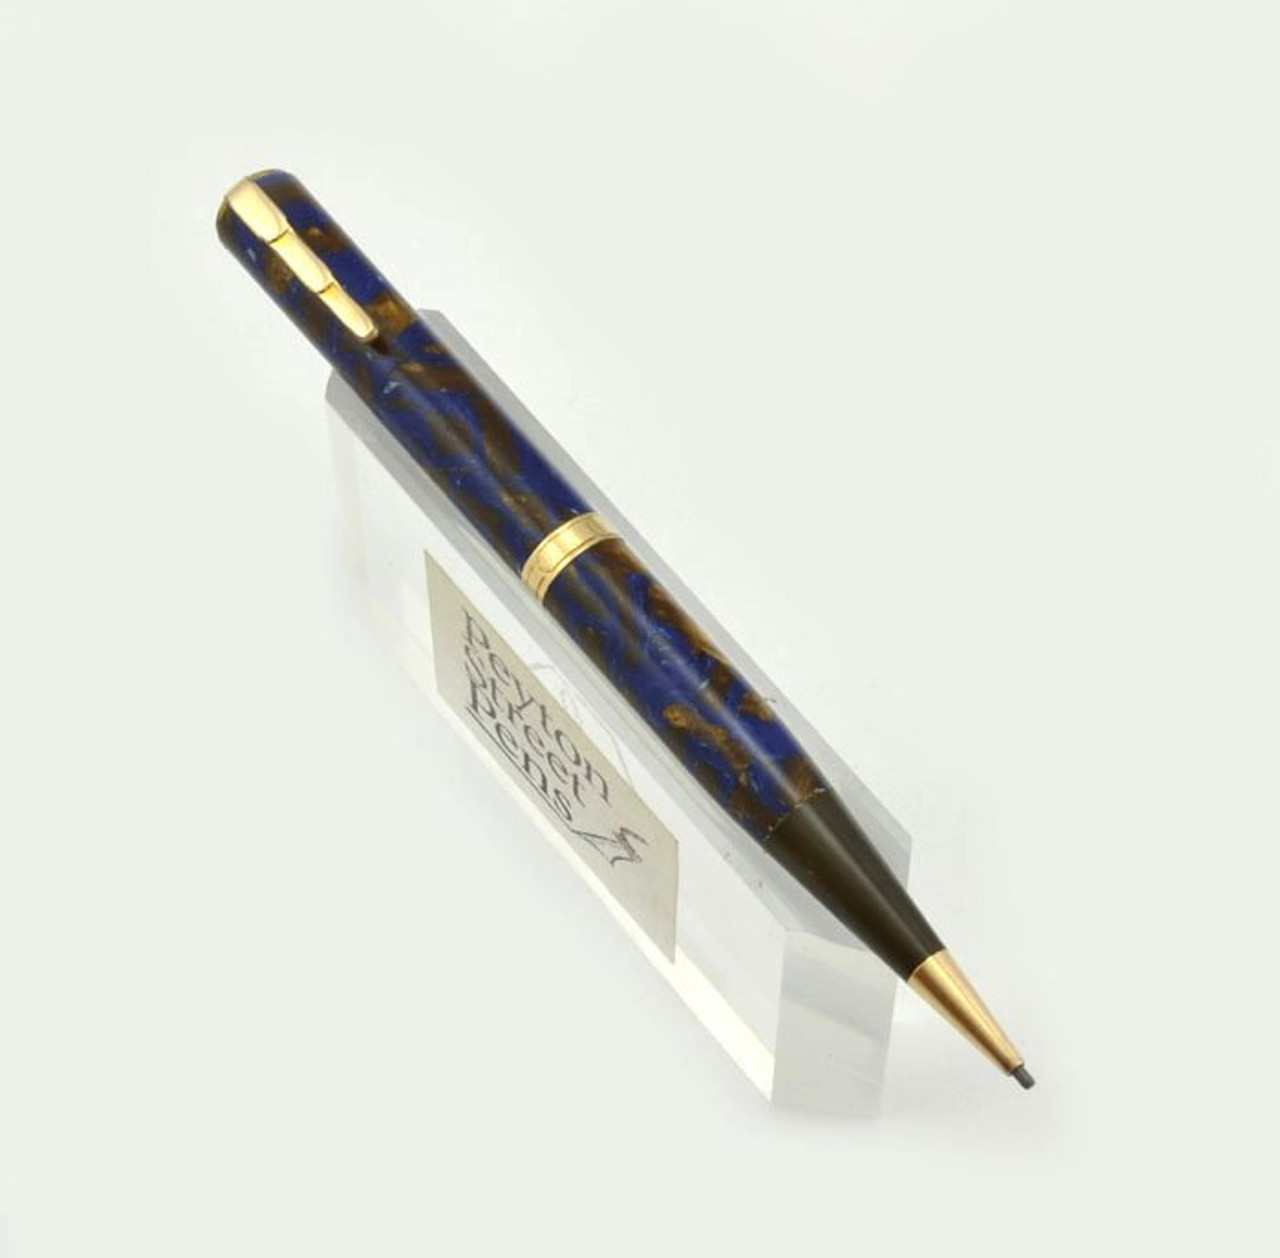 Waterman Lady Patricia Mechanical Pencil - Turquoise (Hard to Find)